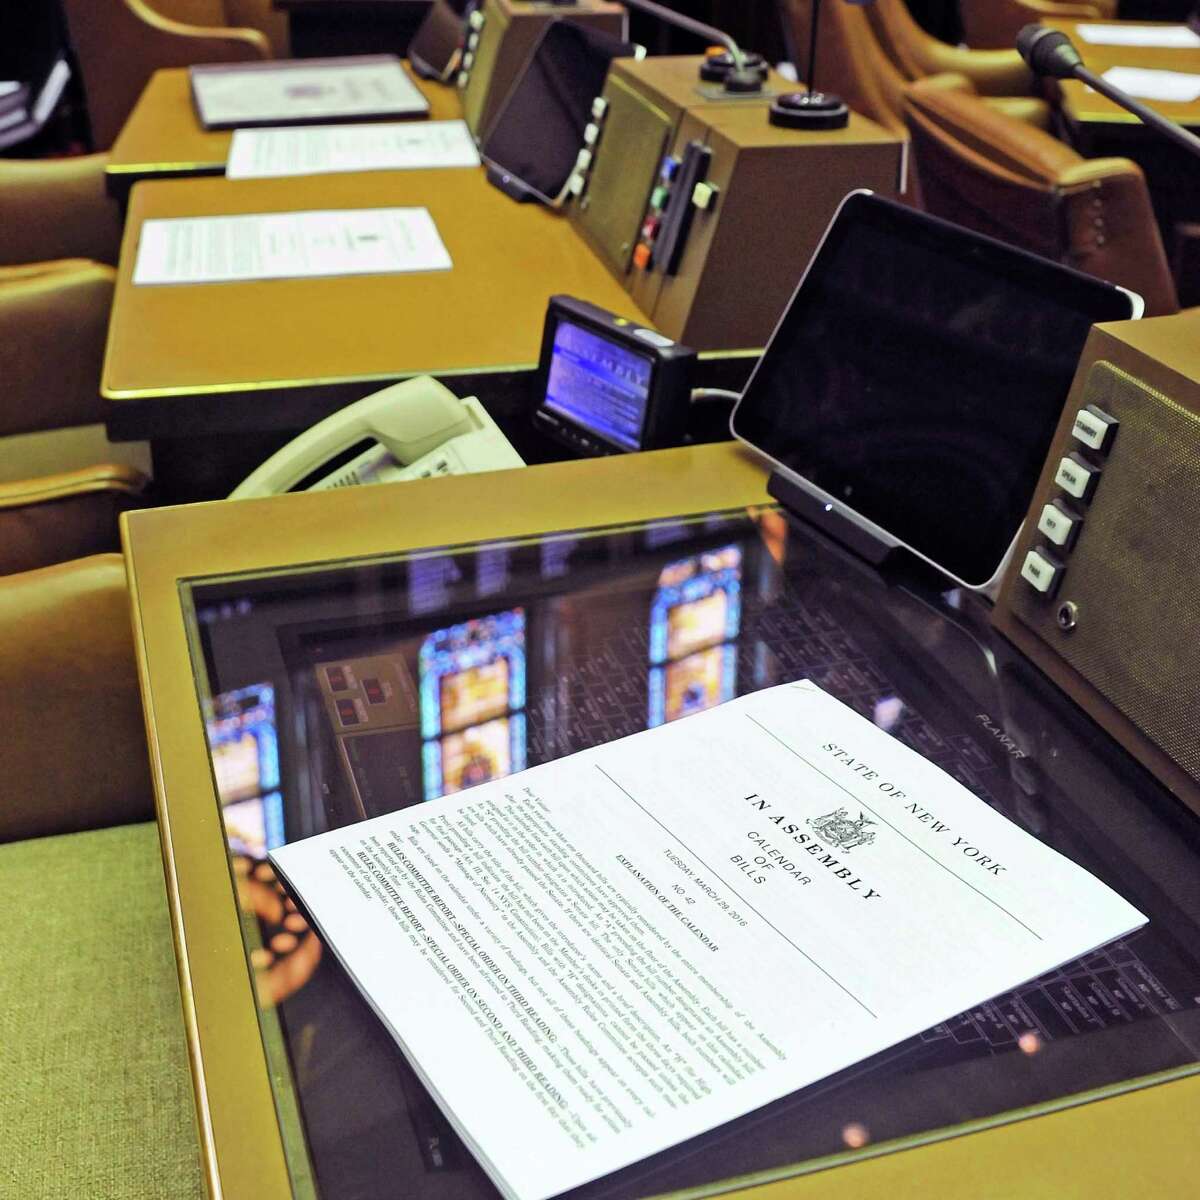 Calendar of Bills await legislators in the Assembly Chambers on Tuesday, March 29, 2016, at the Capitol in Albany, N.Y. (John Carl D'Annibale / Times Union archive)